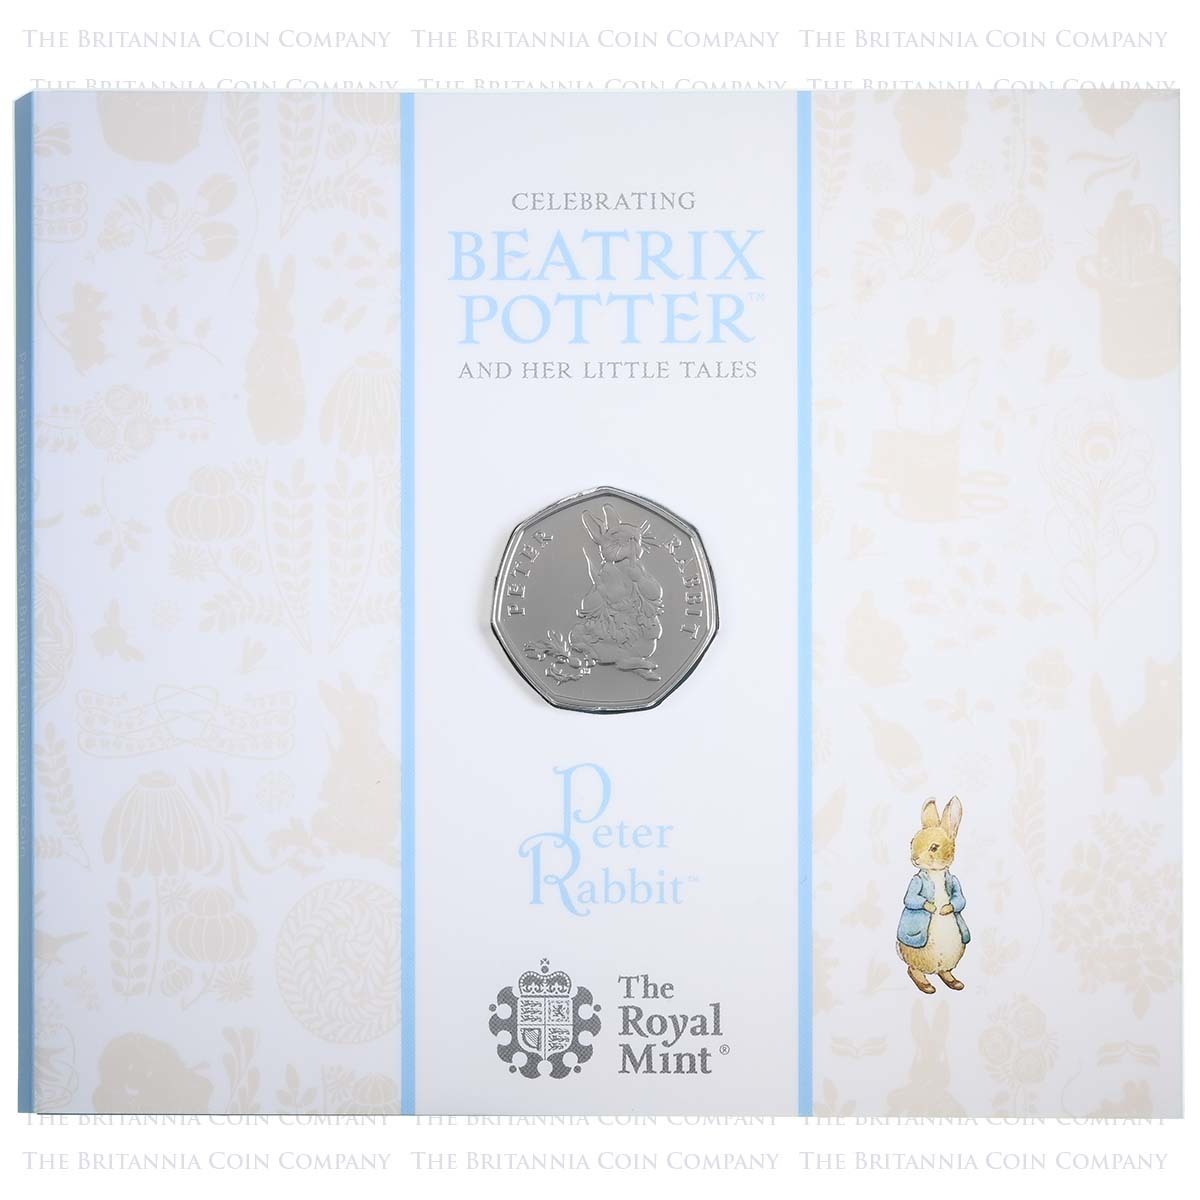 UK18PRBU 2018 Beatrix Potter Peter Rabbit Fifty Pence Brilliant Uncirculated Coin In Folder